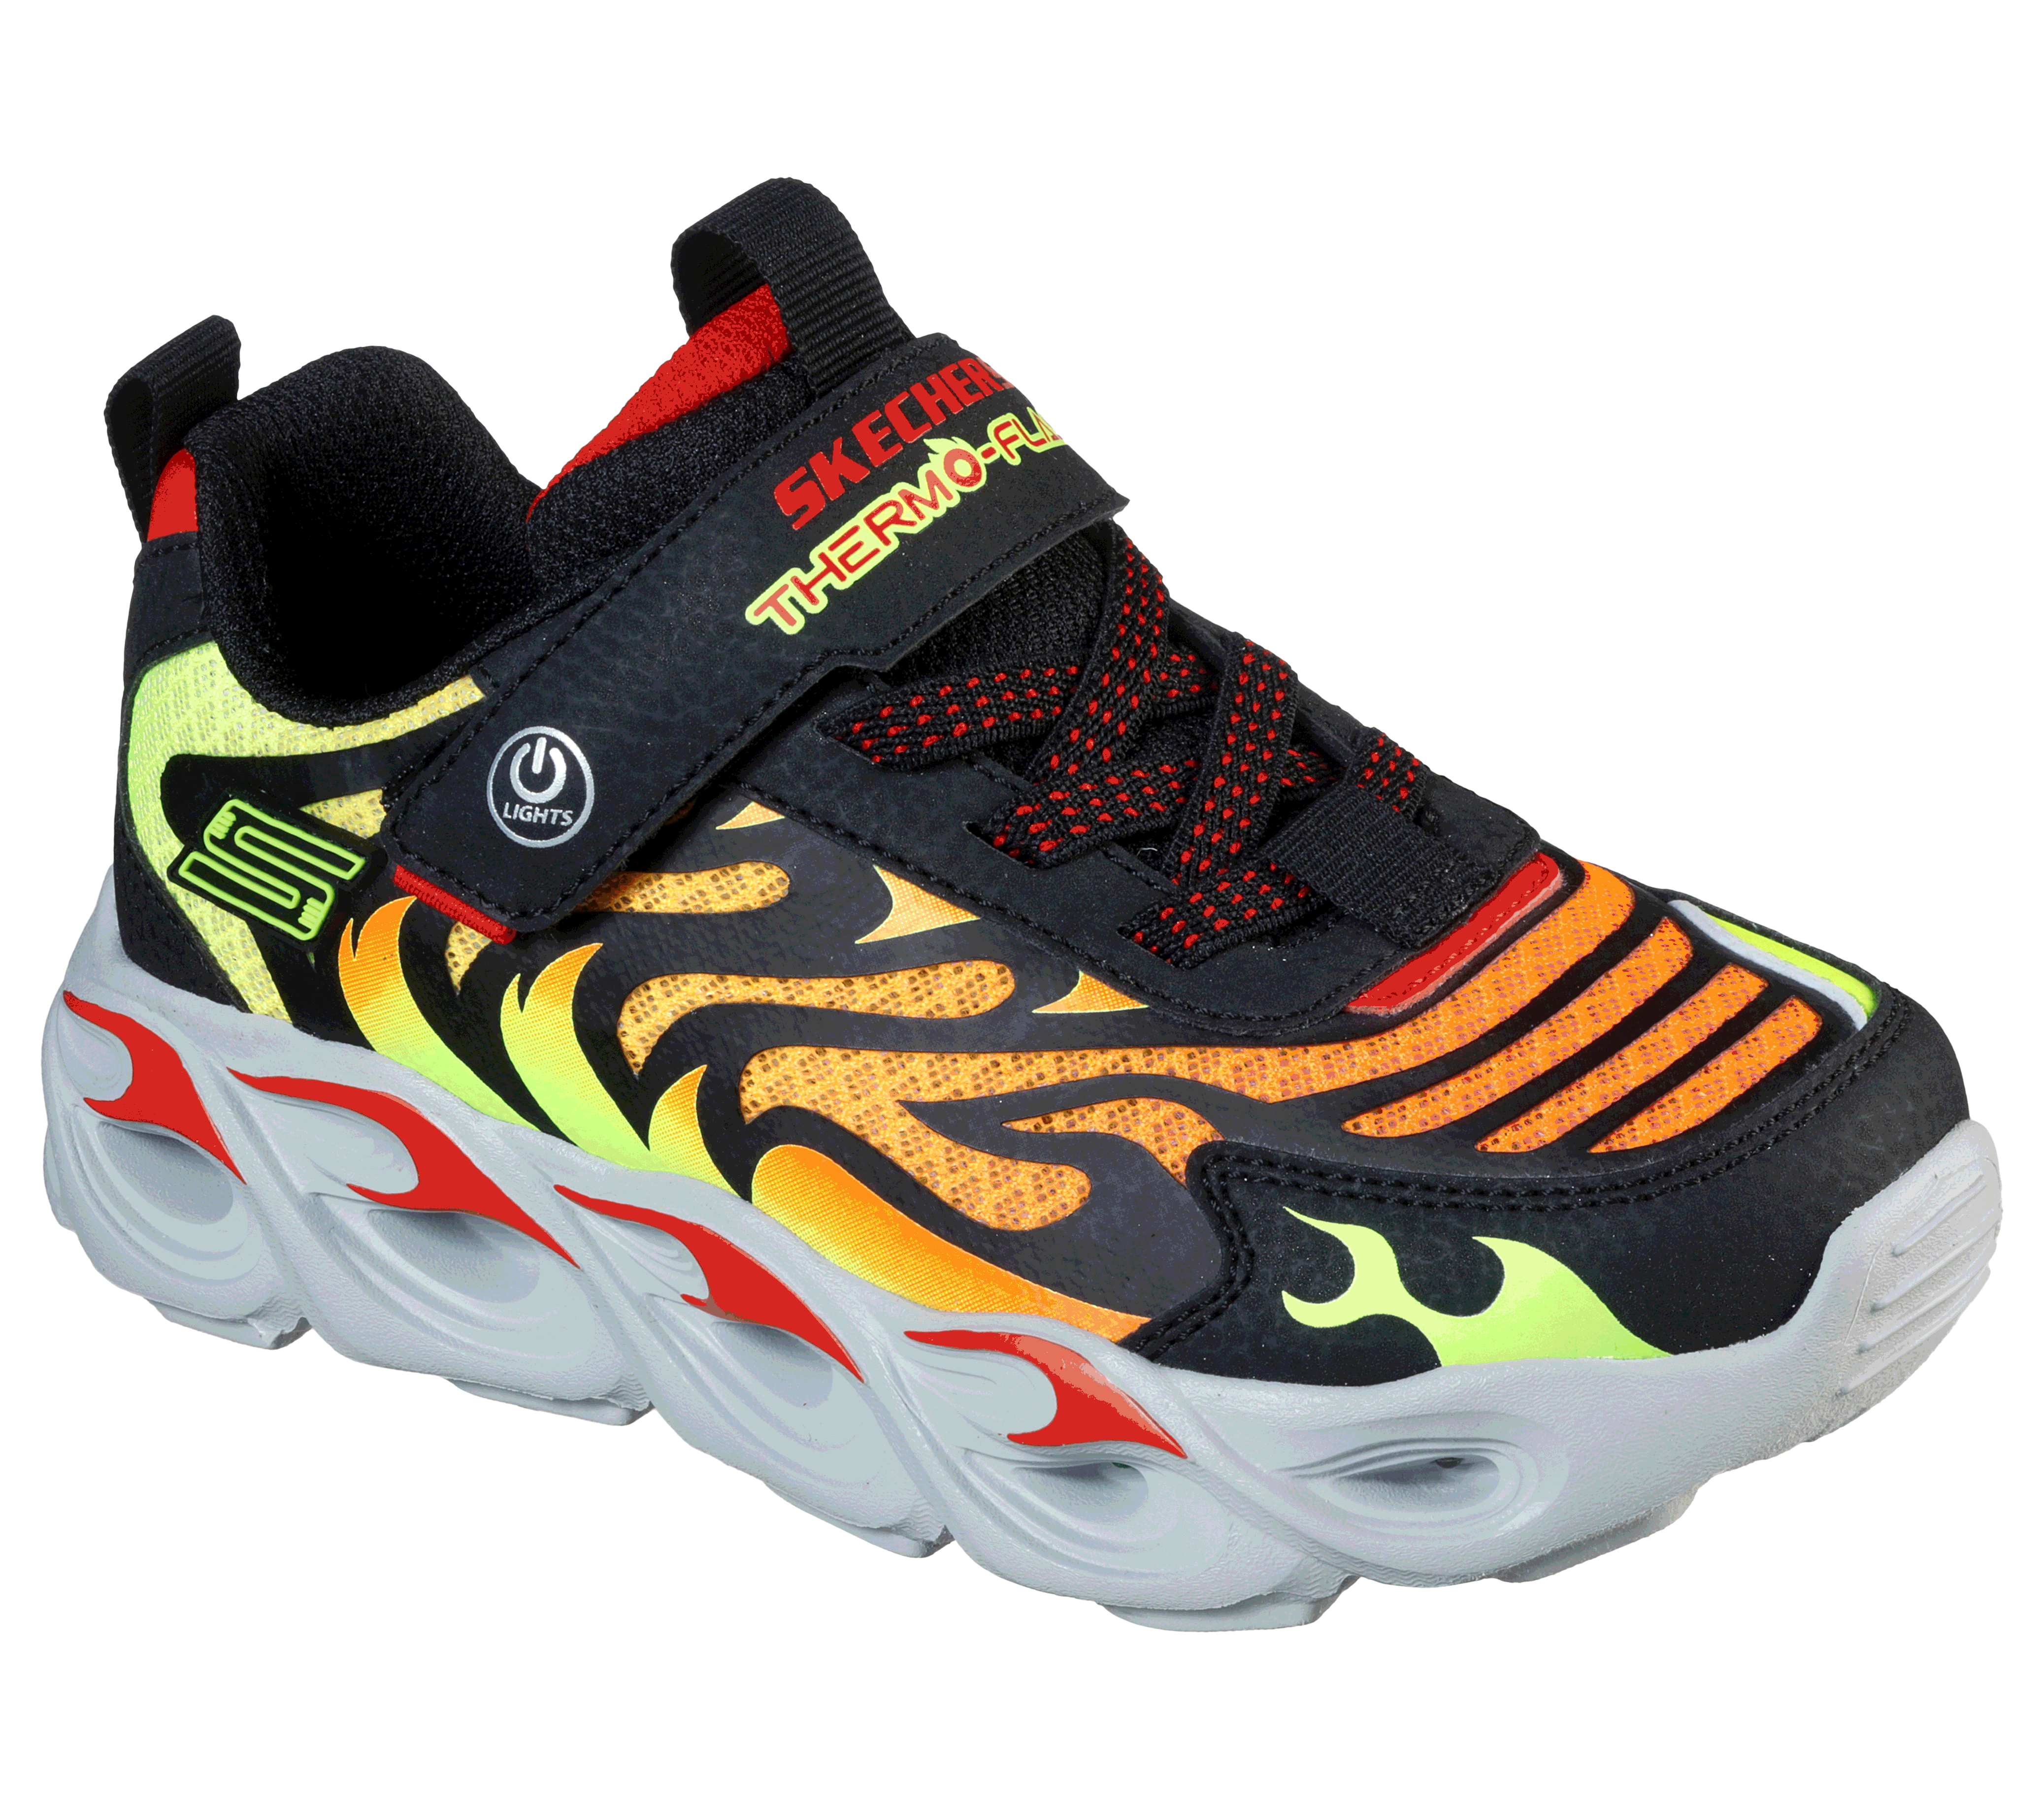 skechers light up shoes troubleshooting